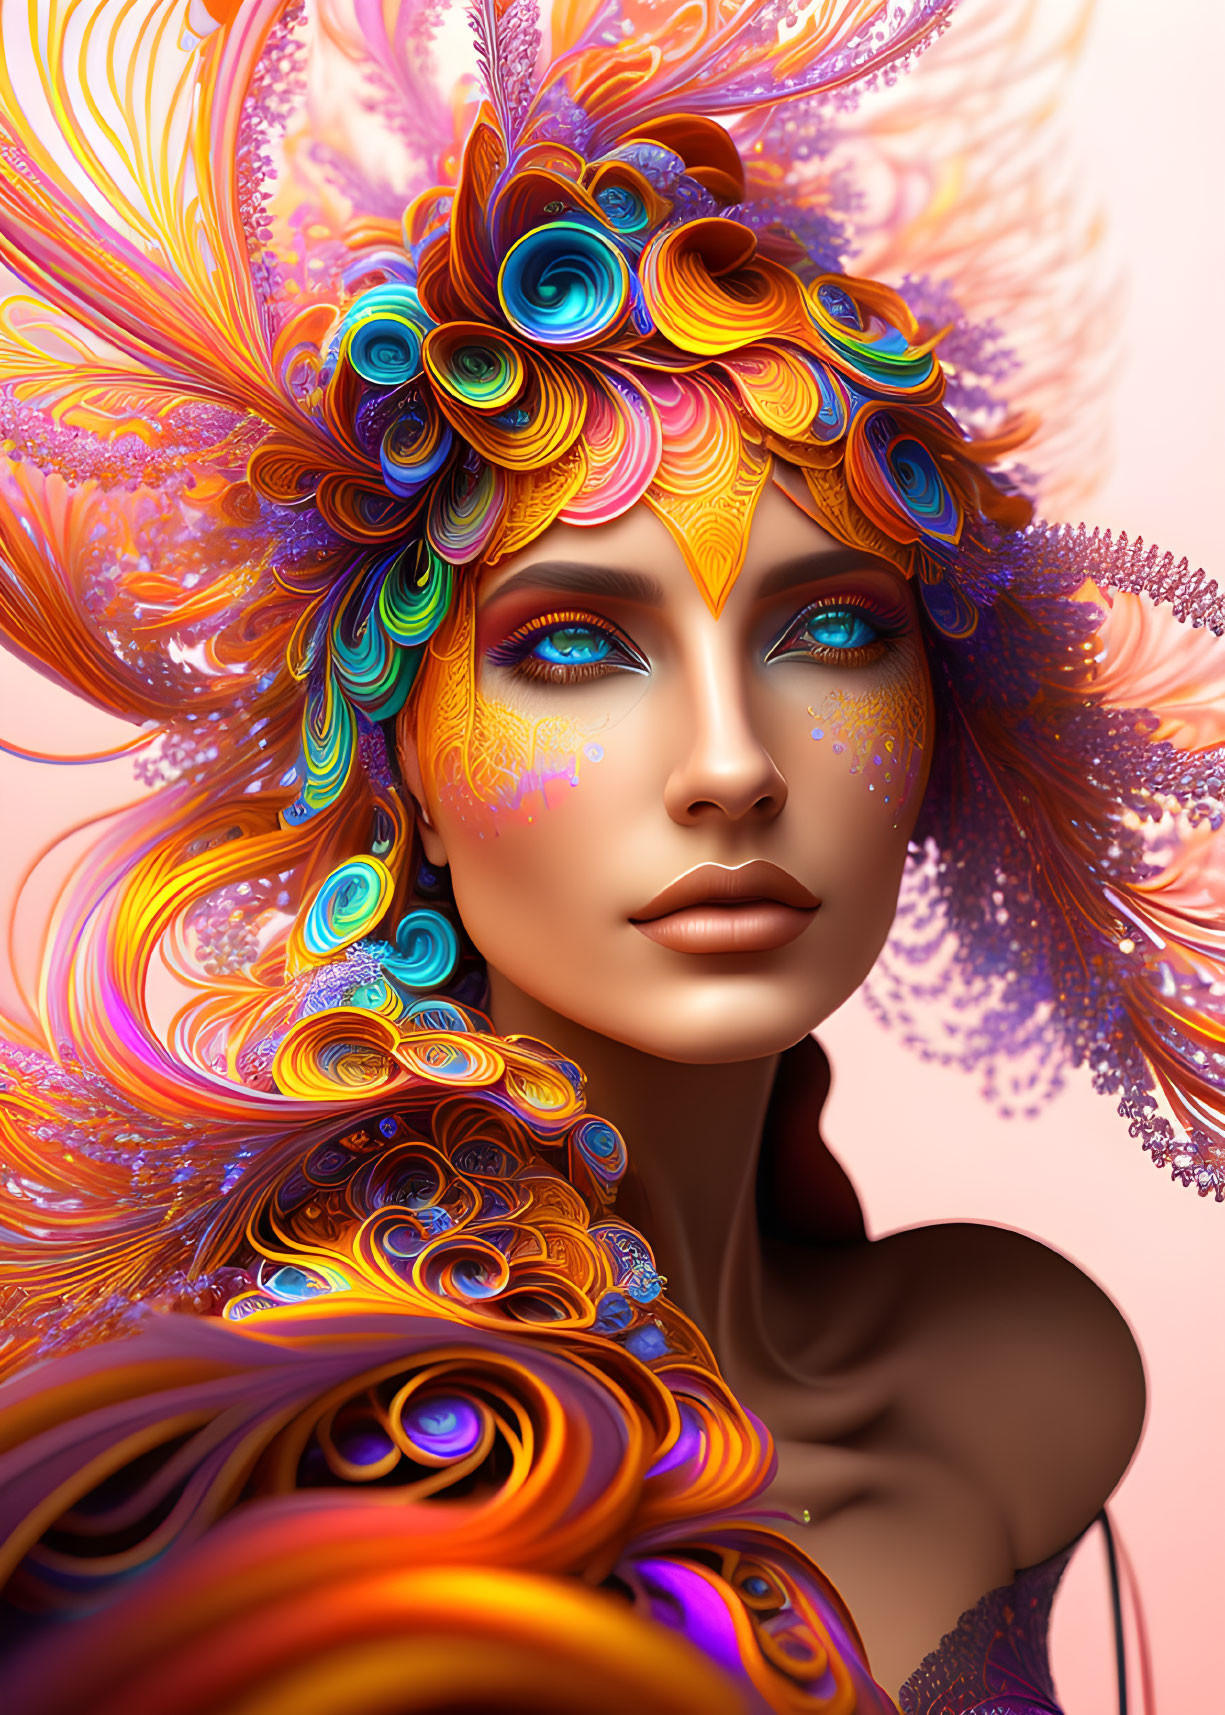 Colorful digital artwork of a woman with ornate headdress and makeup